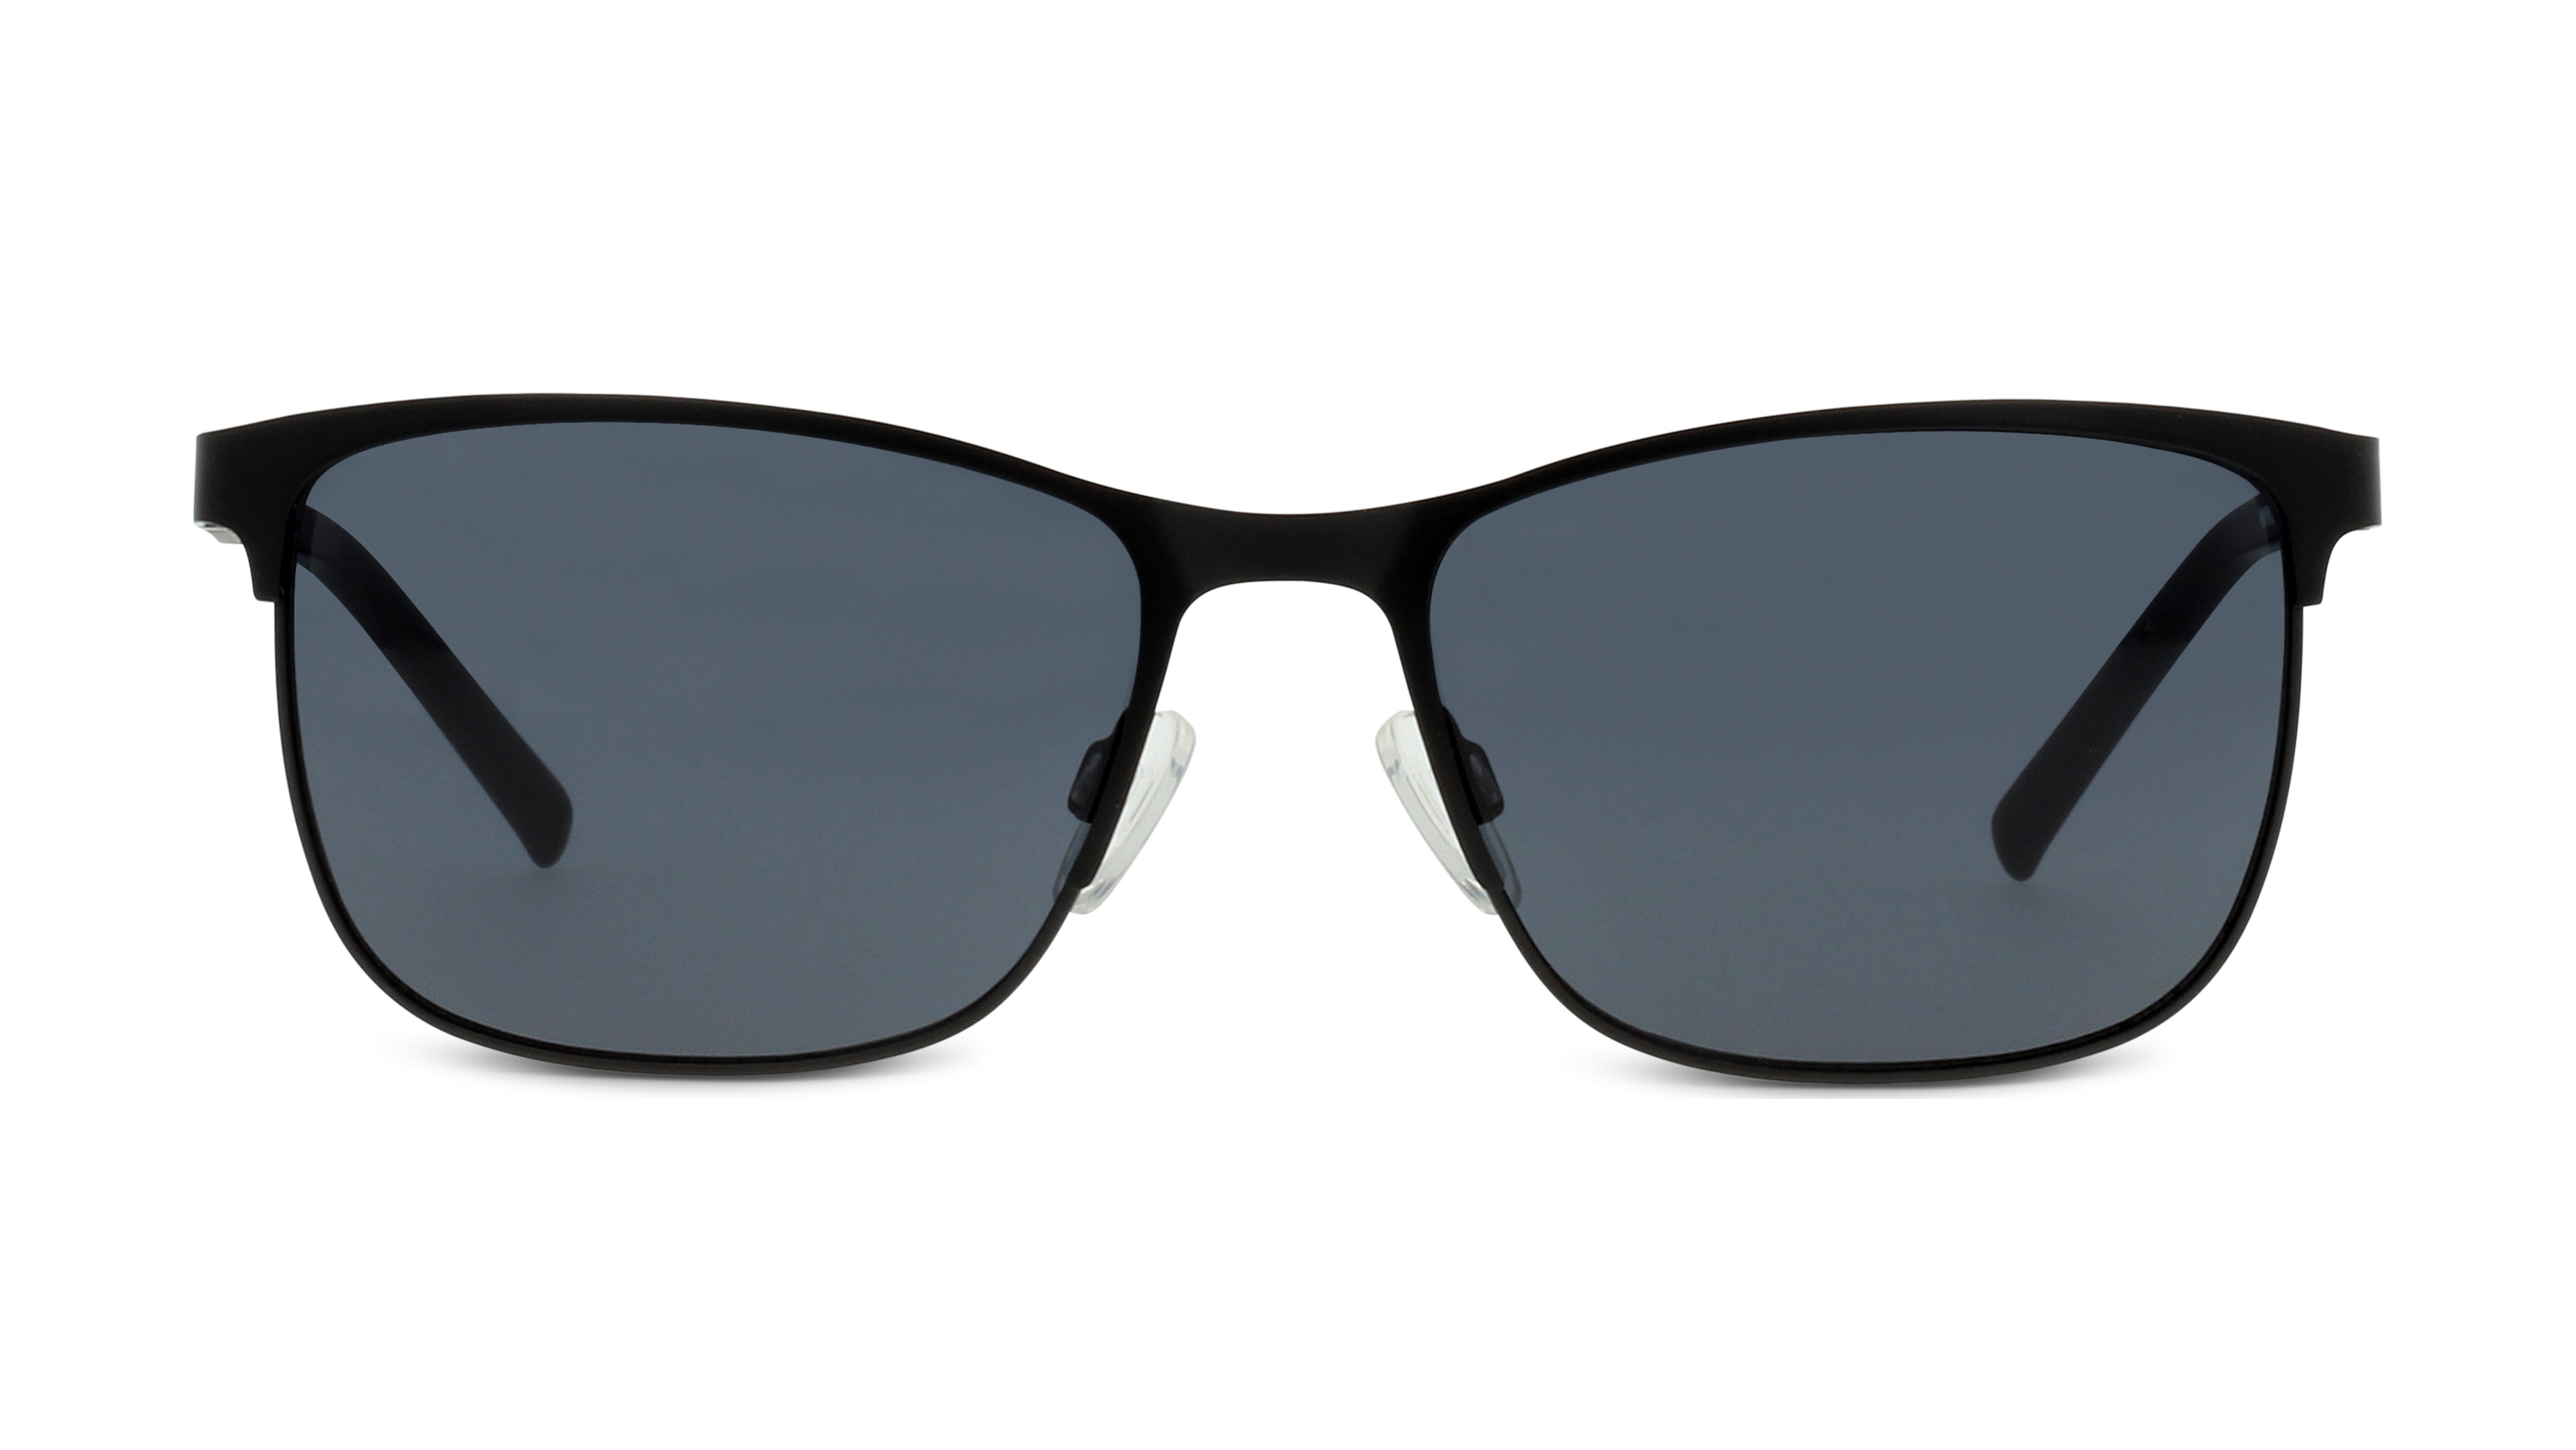 [products.image.front] HUMPHREY´S eyewear 585227 101030 Sonnenbrille